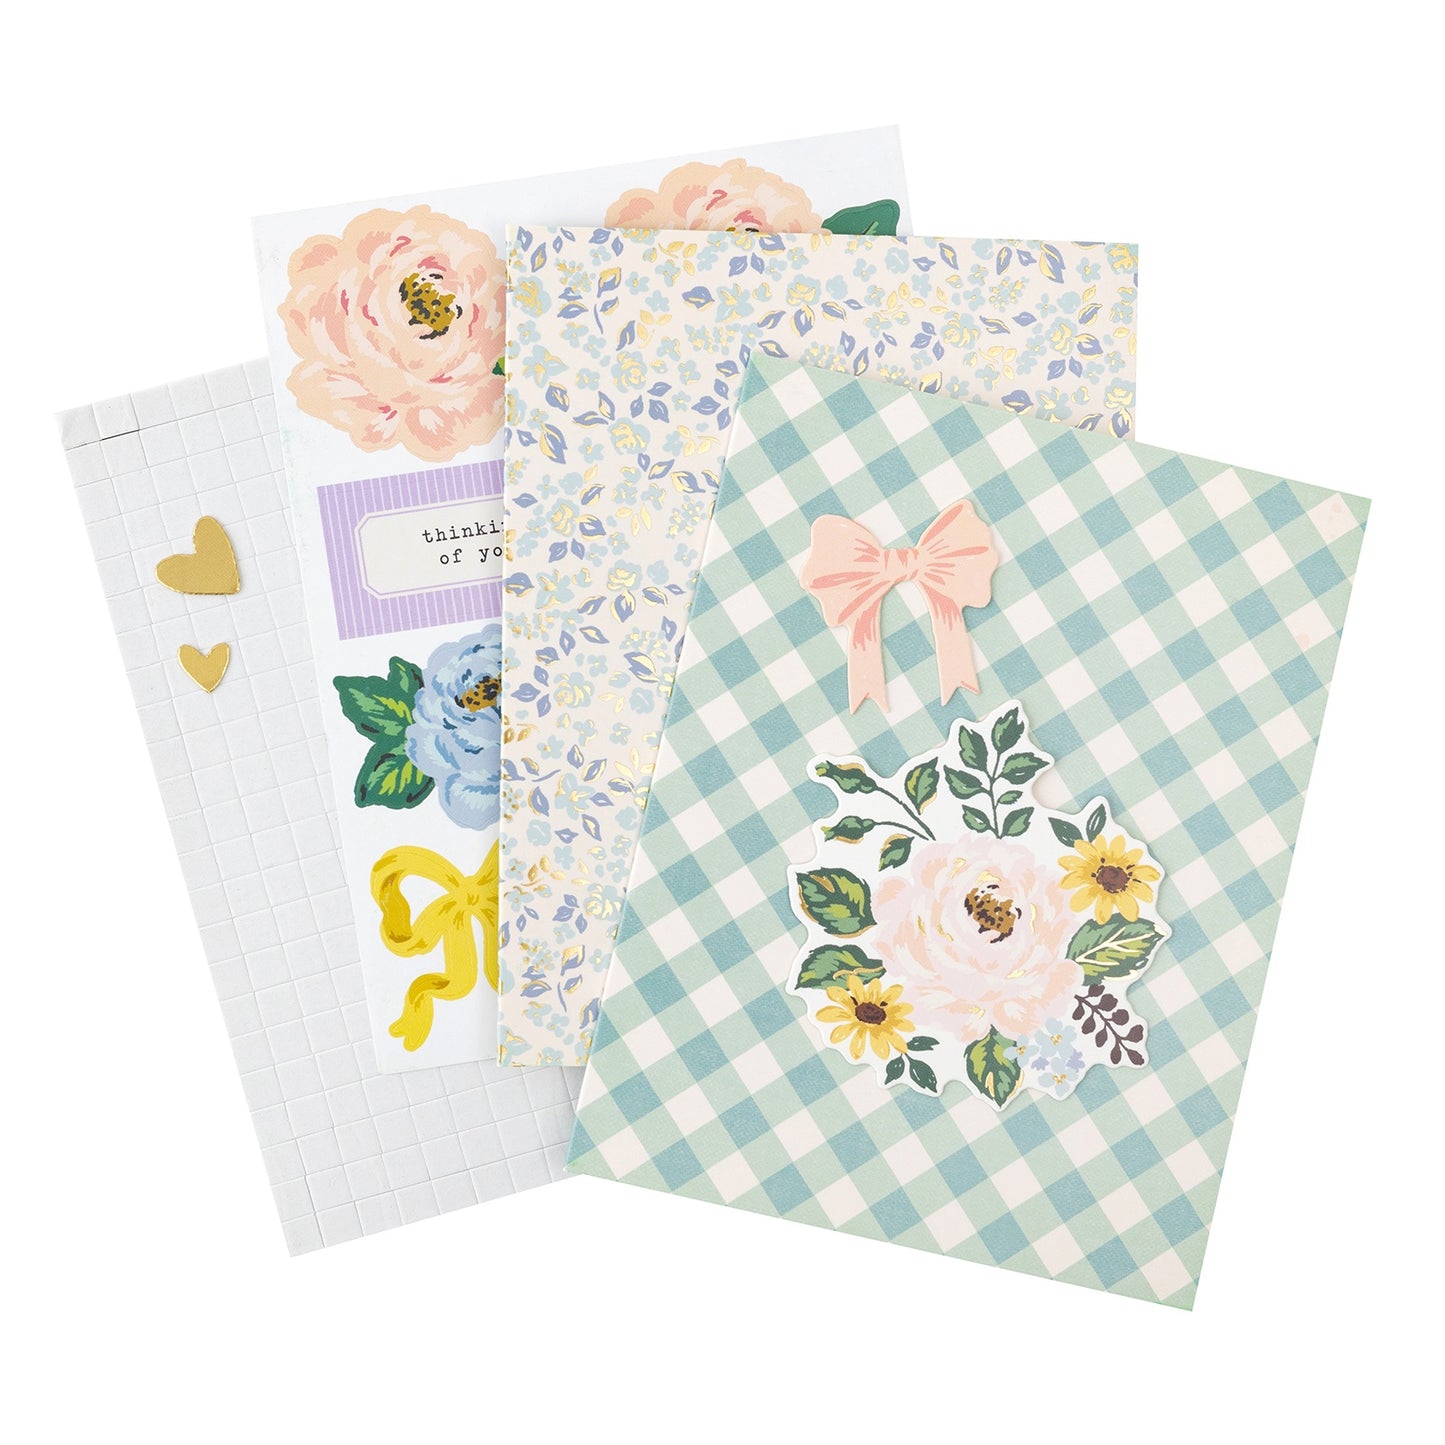 Maggie Holmes Woodland Grove Card Kit-Makes 20 Cards